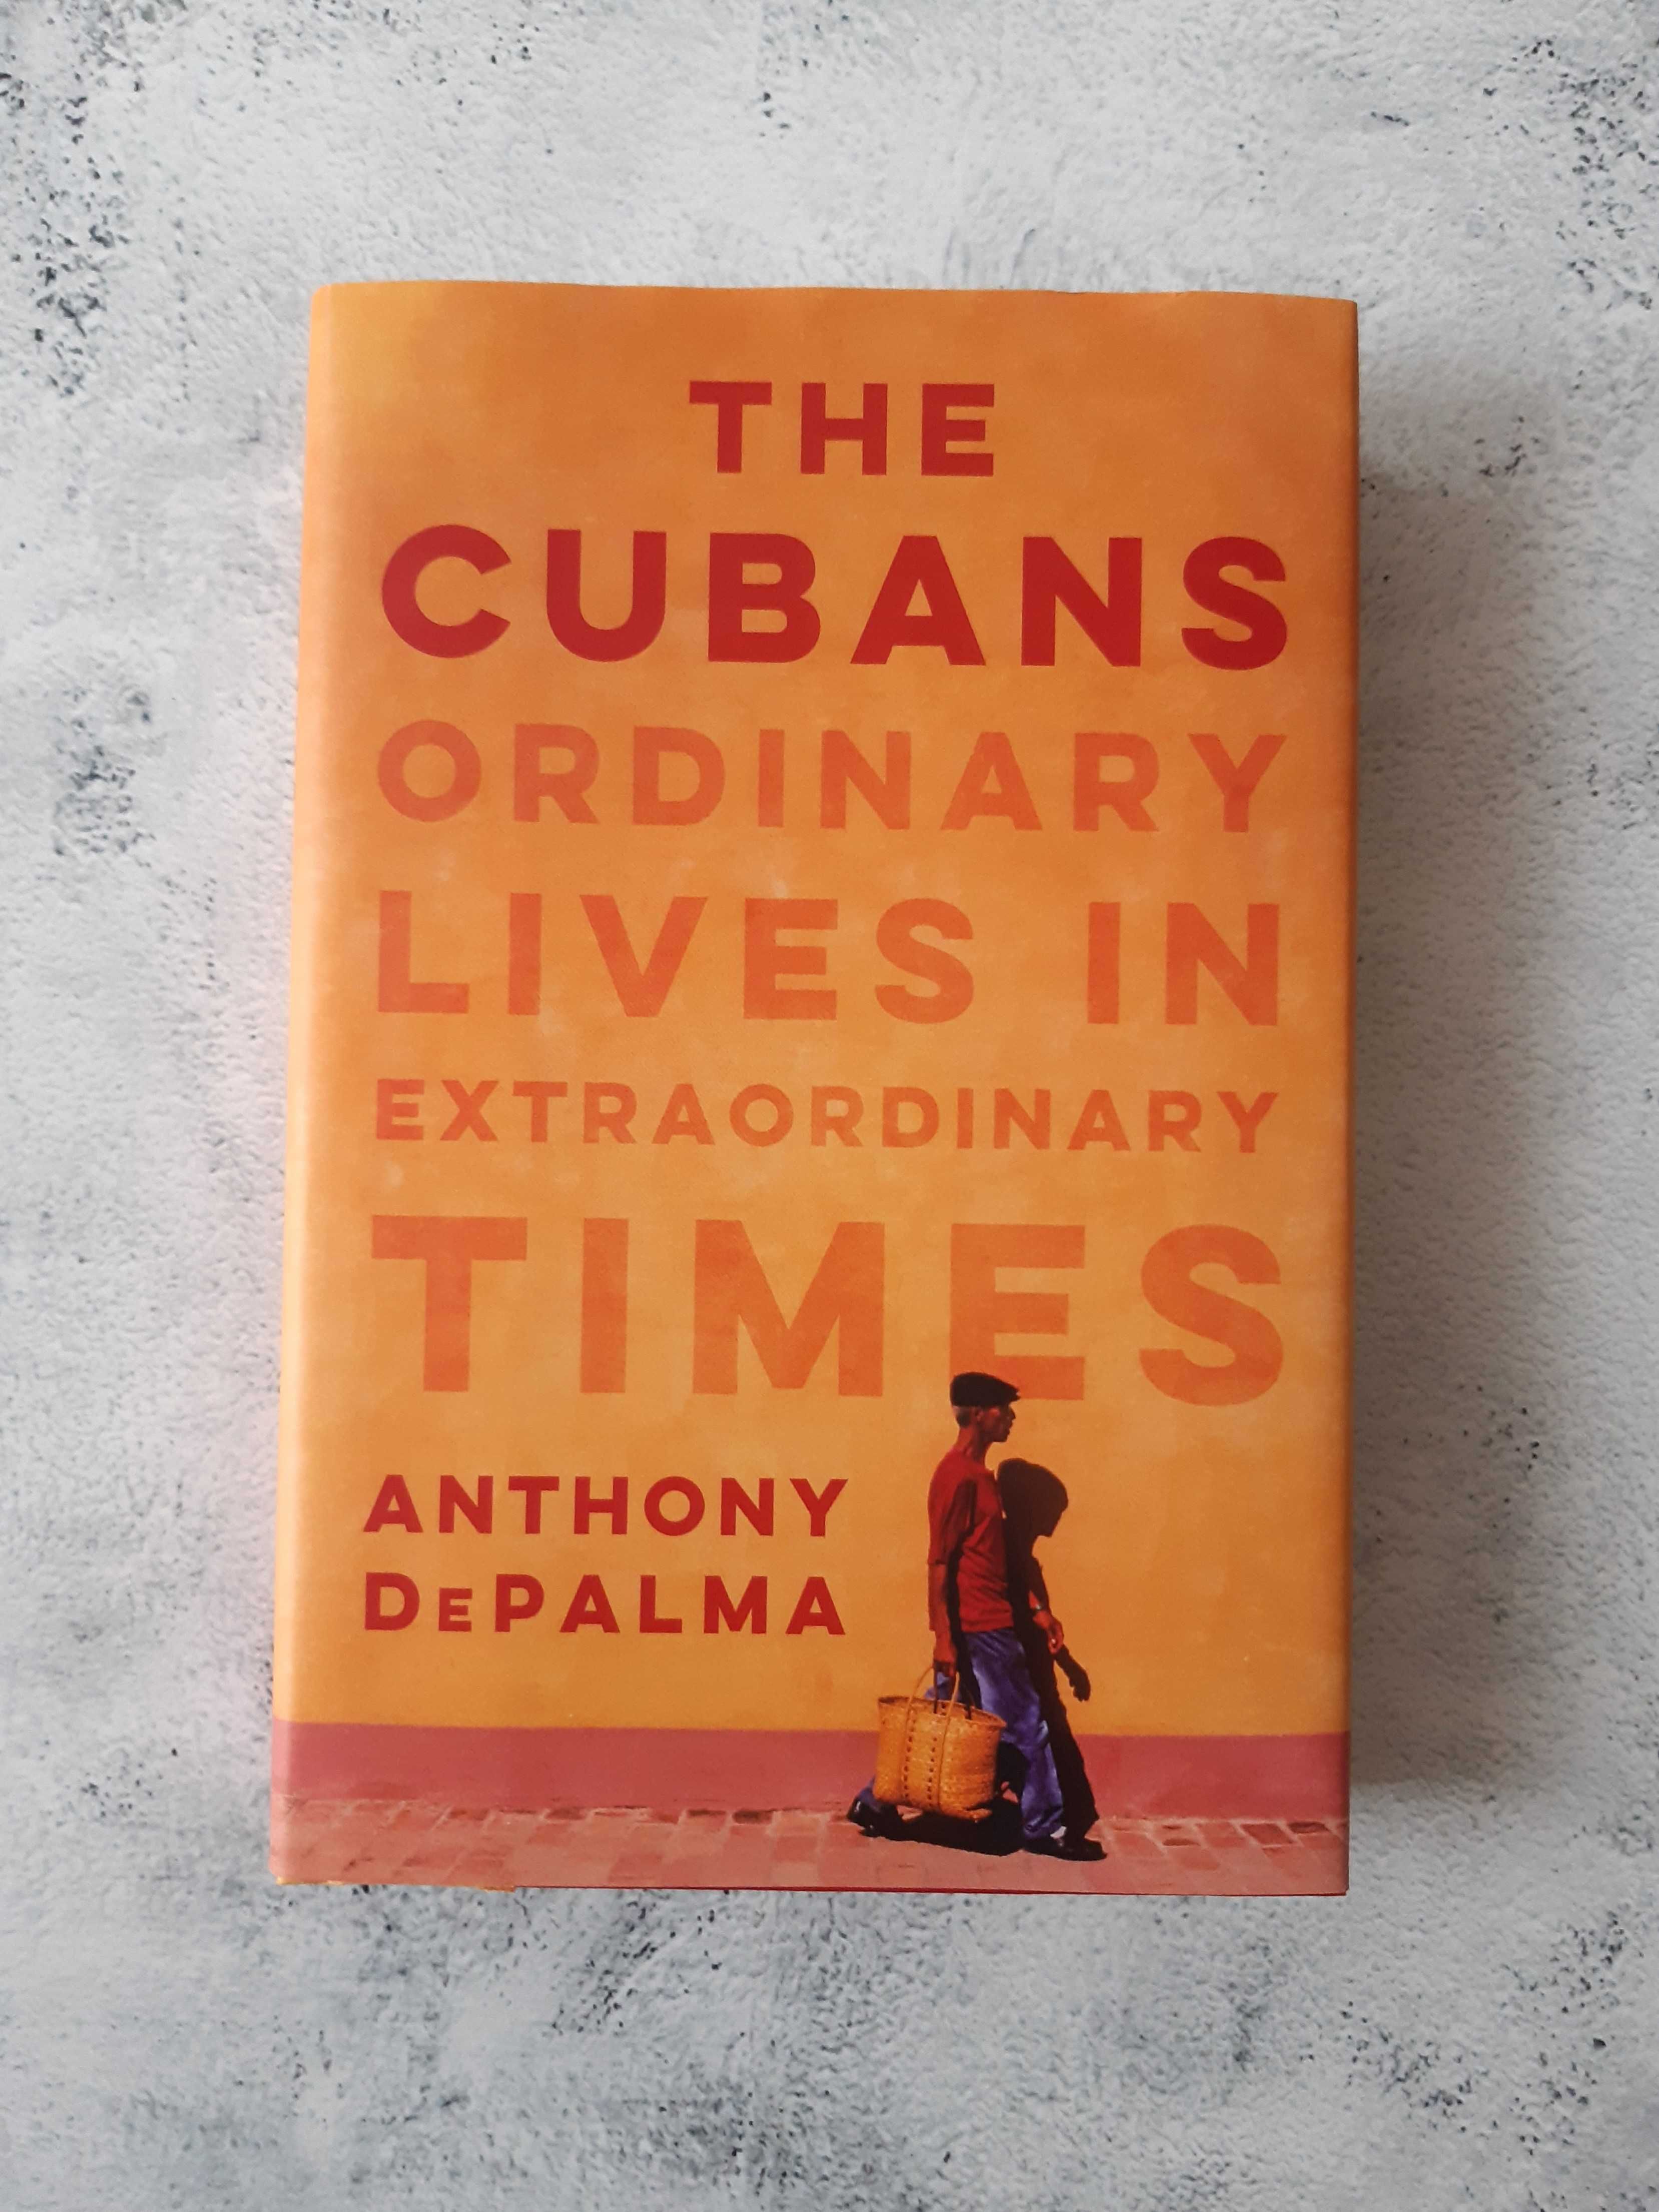 The Cubans Ordinary Lives in Anthony De Palma